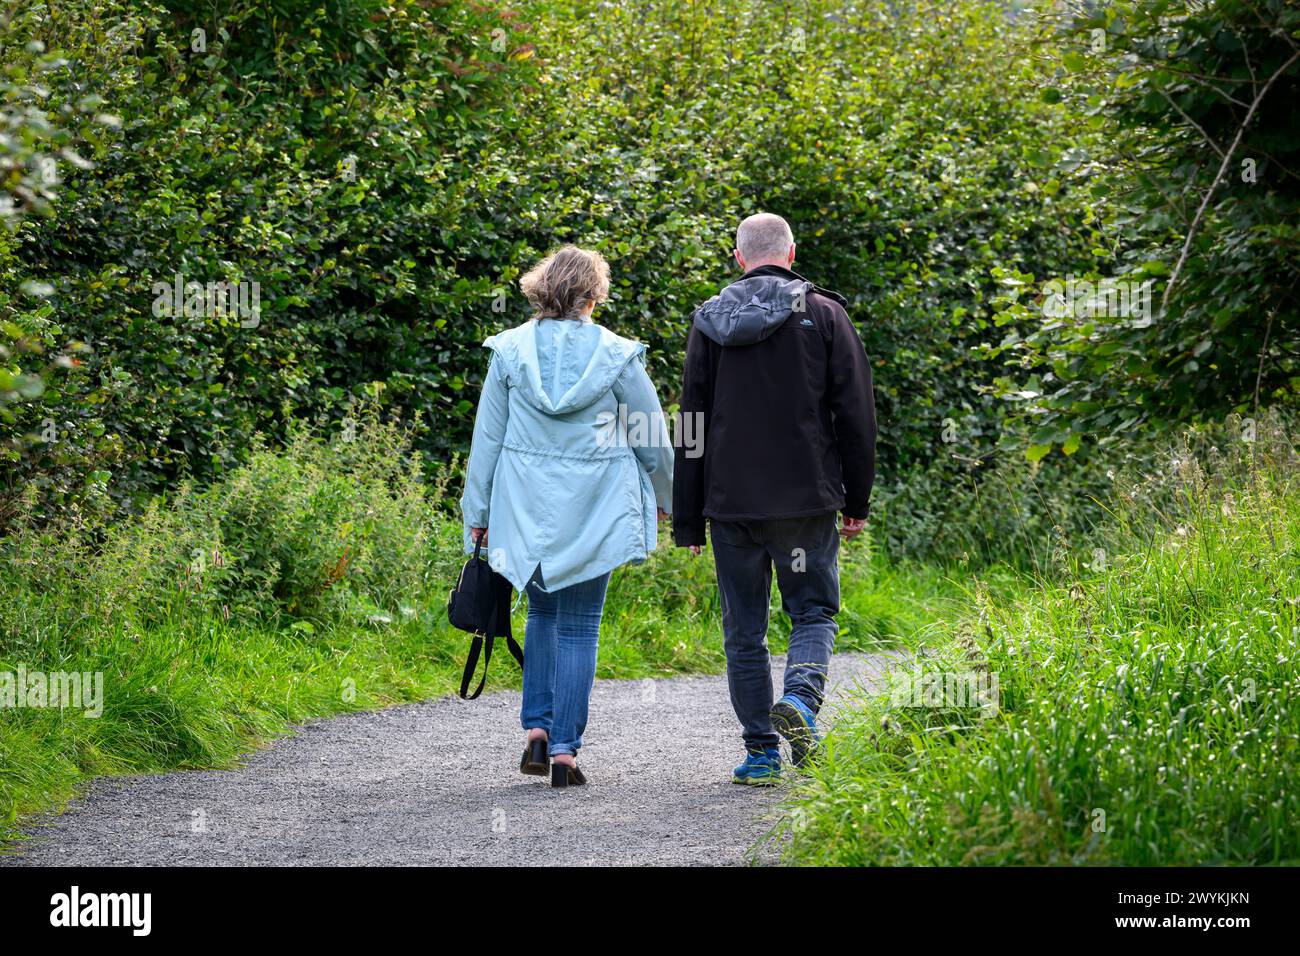 Paths for all, Loch Leven, Heritage Trail, couple walkers Stock Photo